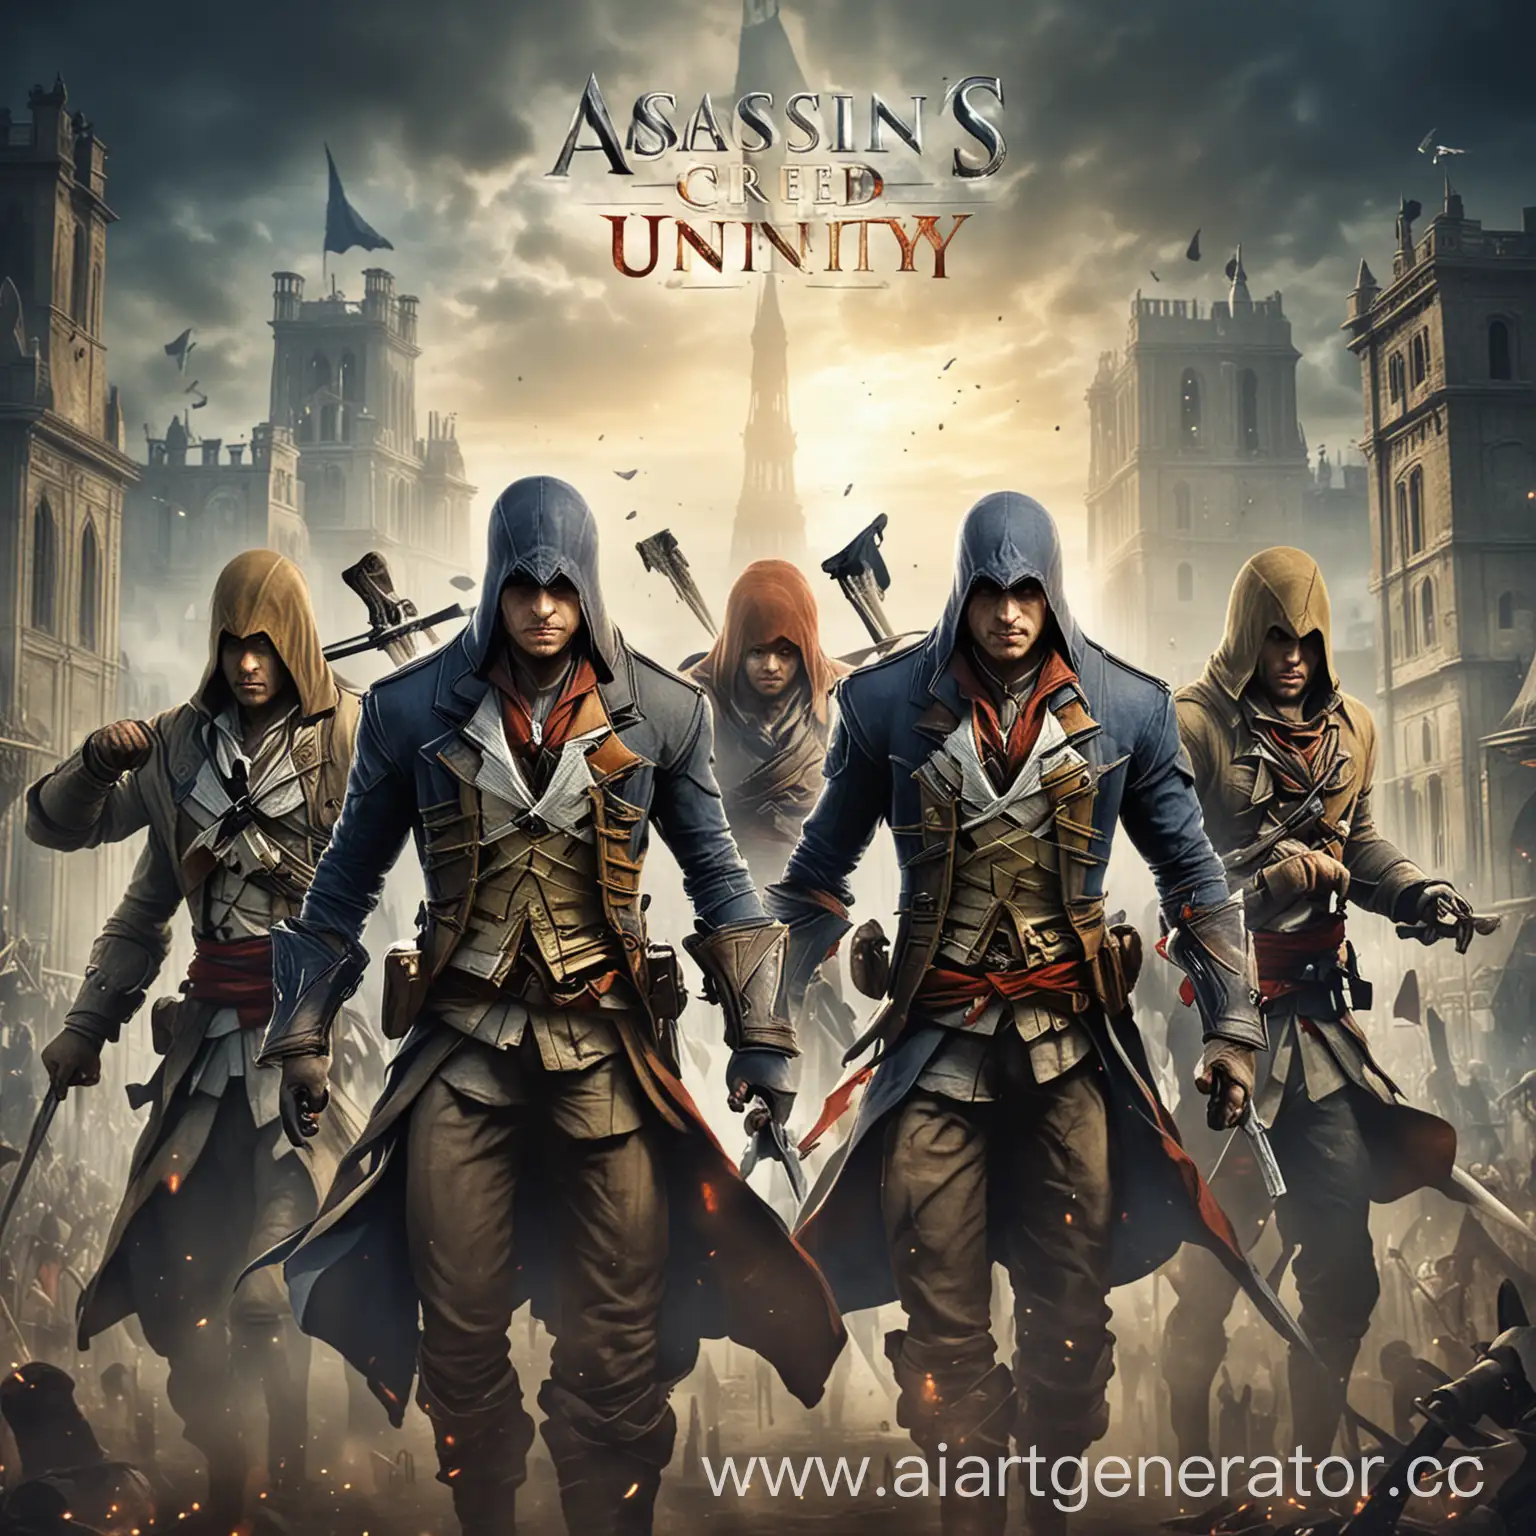 Assassins-Creed-Unity-Game-Cover-in-Disney-Style